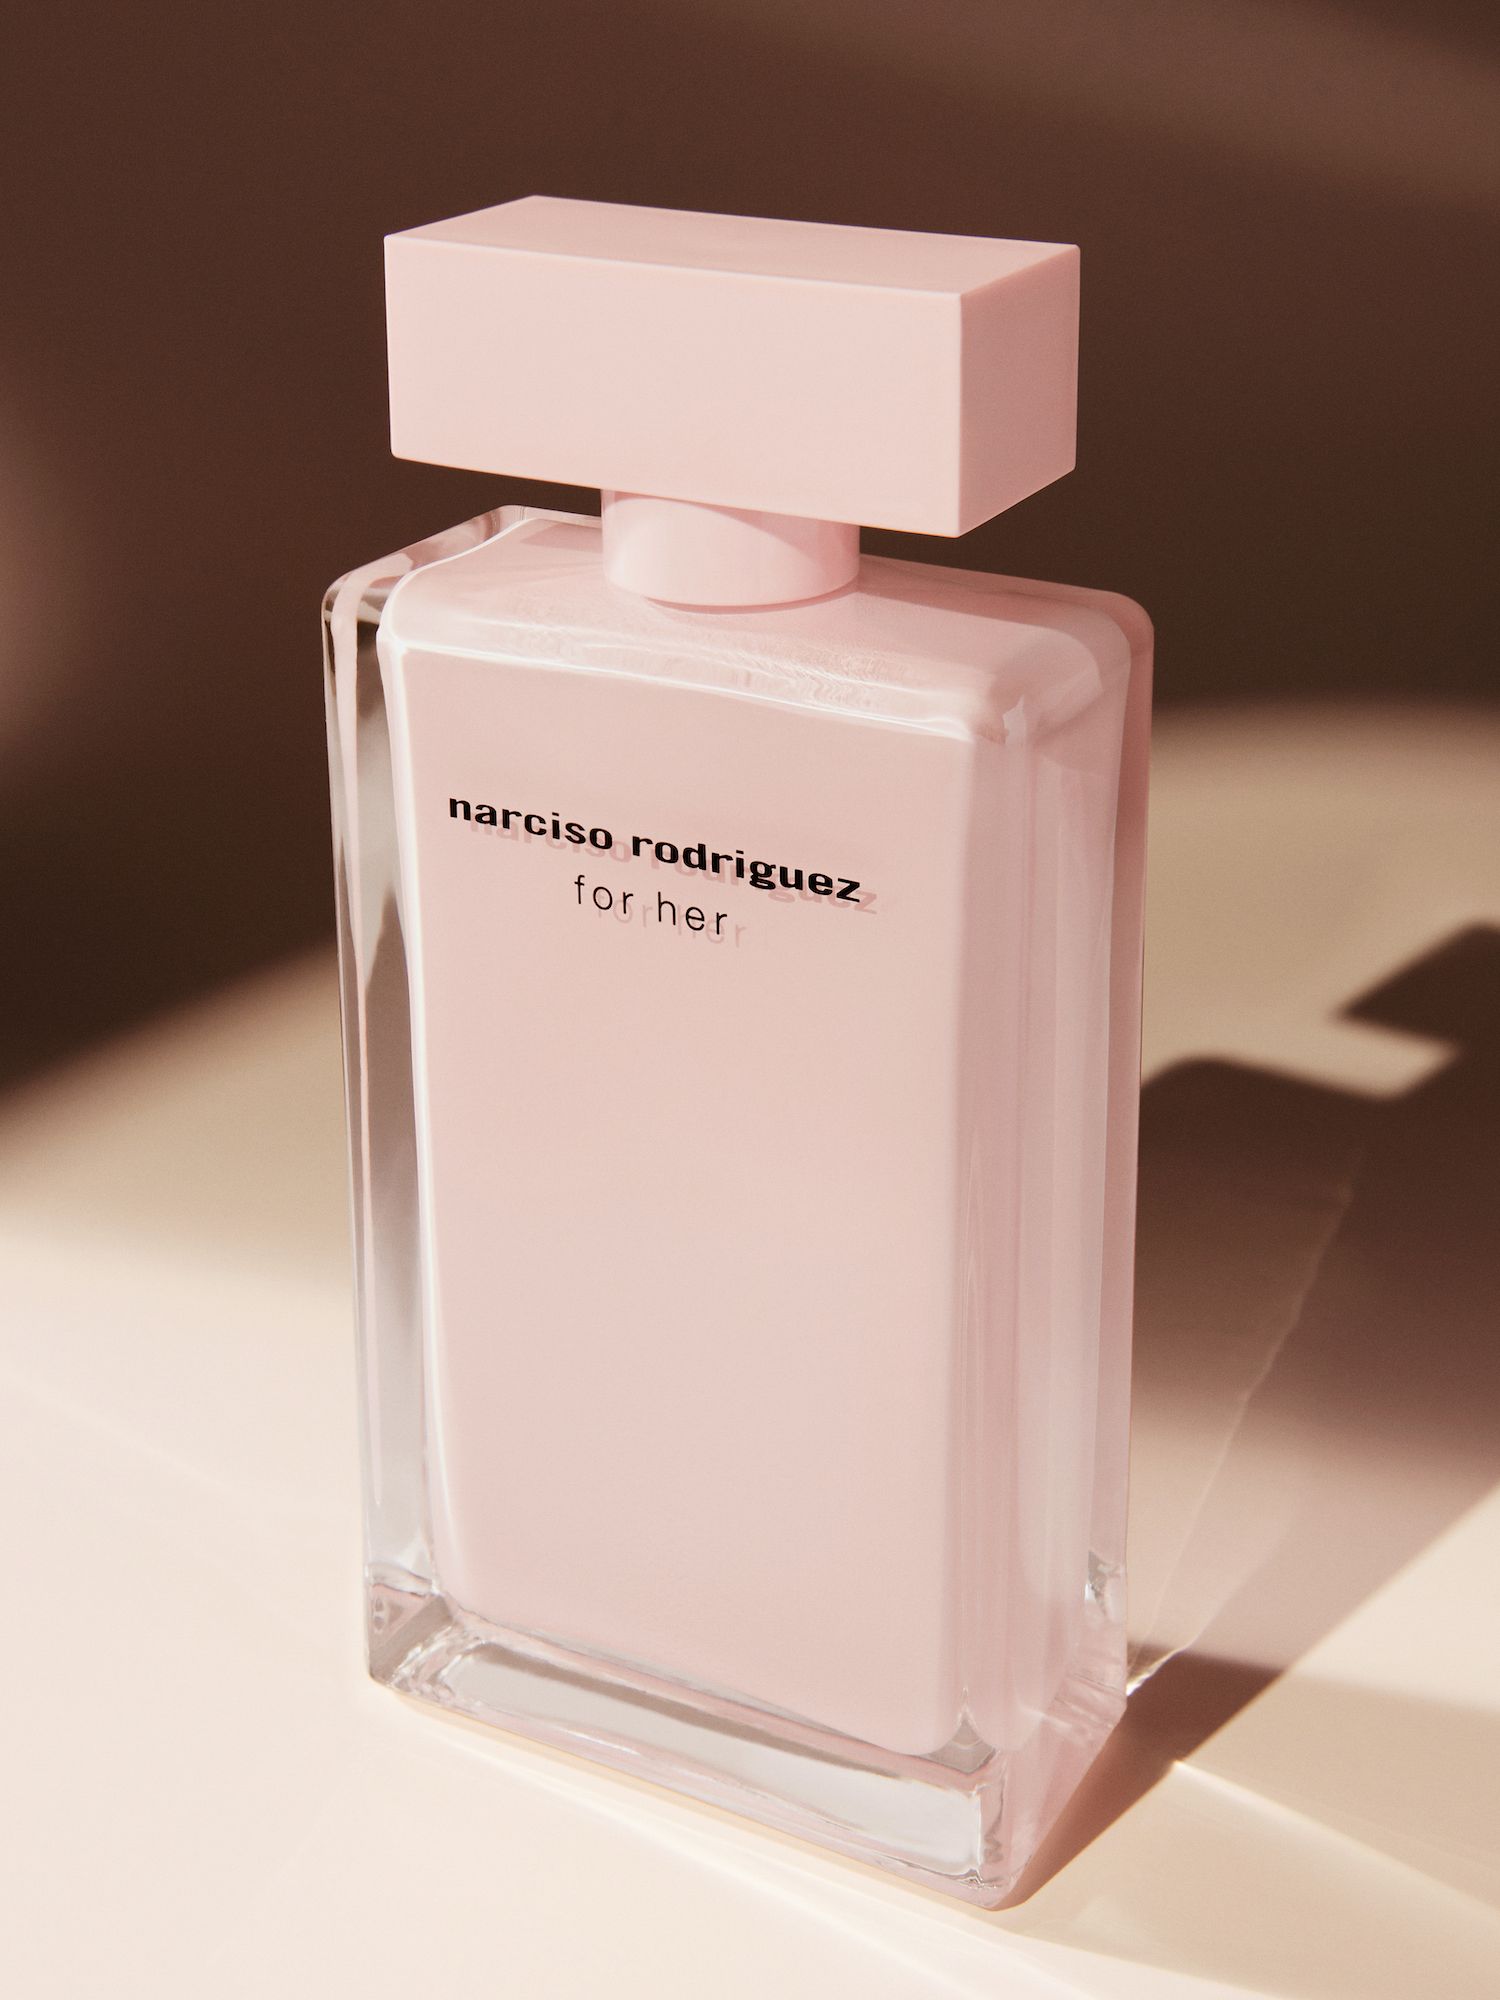 Narciso Rodriguez for Her Eau de Parfum Narciso Rodriguez perfume - a fragrance  for women 2006